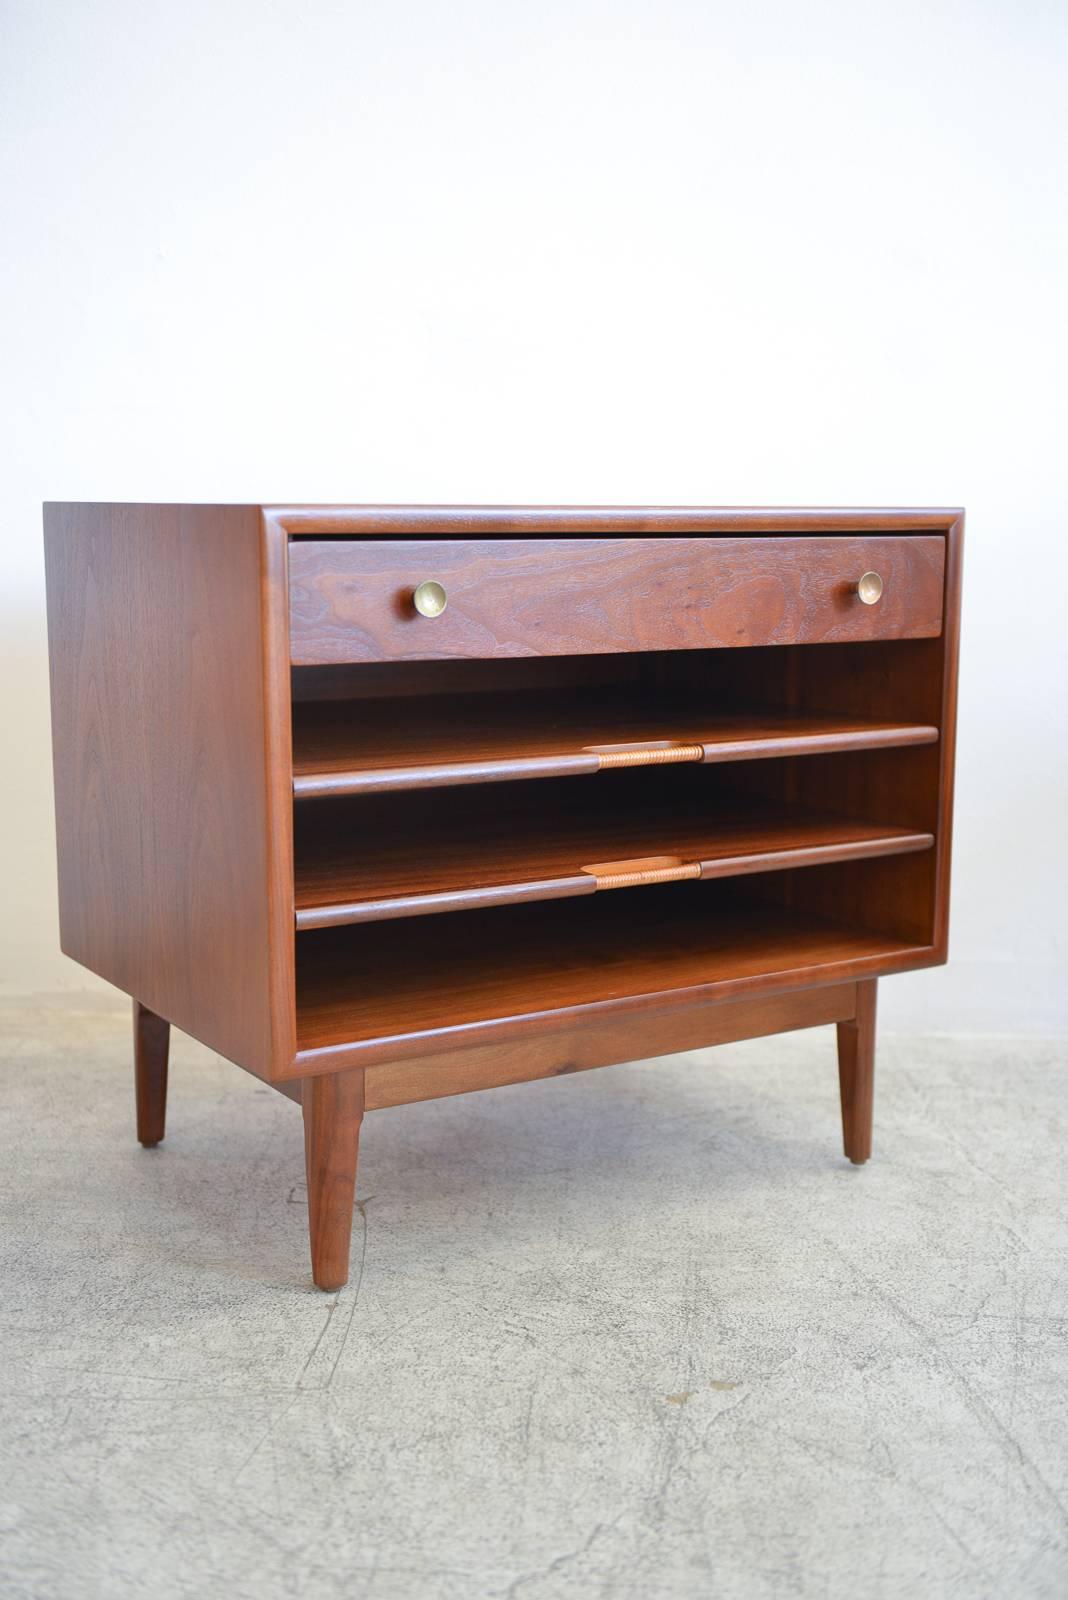 Kipp Stewart walnut nightstand or end table with pull out magazine shelves, circa 1965. Beautifully restored walnut with cane wrapped pull out shelves. Showroom condition.

Measures 26